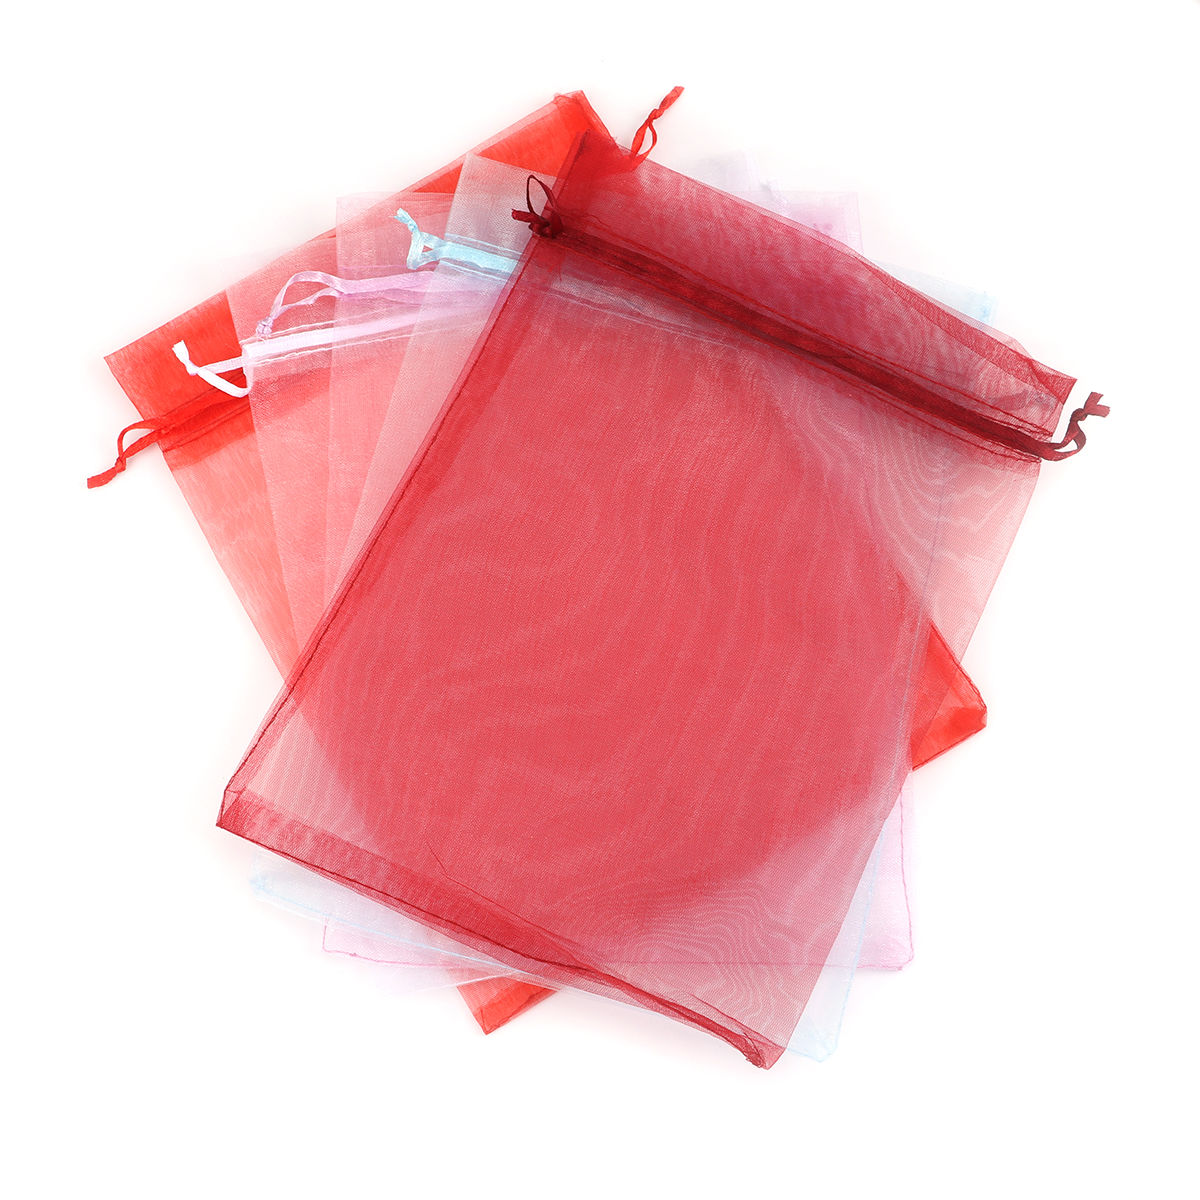 Picture of Wedding Gift Organza Jewelry Bags Drawstring Rectangle Orange 20cm x15cm(7 7/8" x5 7/8"), (Usable Space: 17x14.5cm) 20 PCs